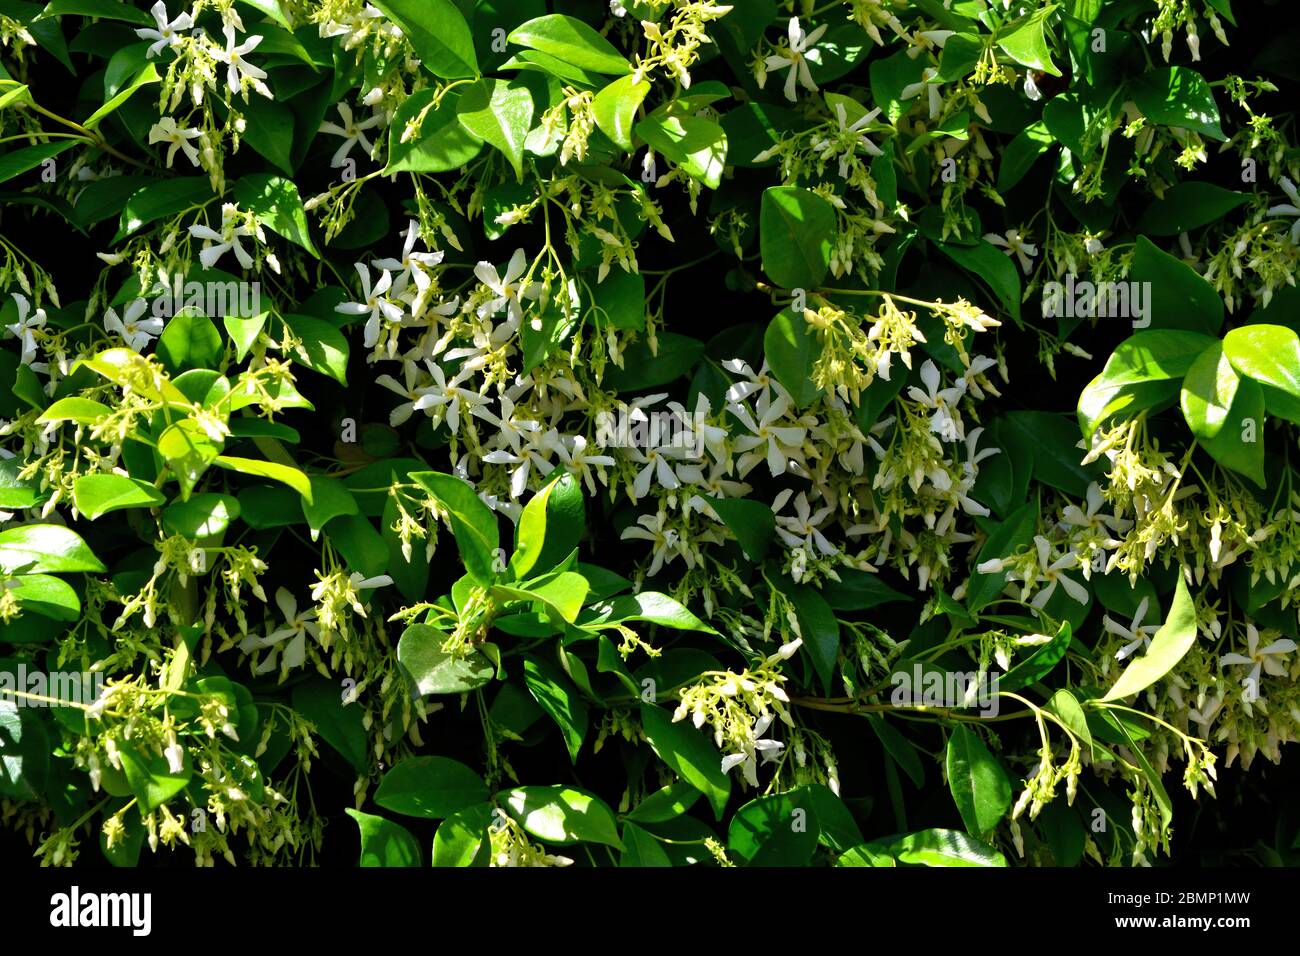 A closeup of freshly blossomed trachelospermum jasminoides flowers, illuminated by the spring sun Stock Photo